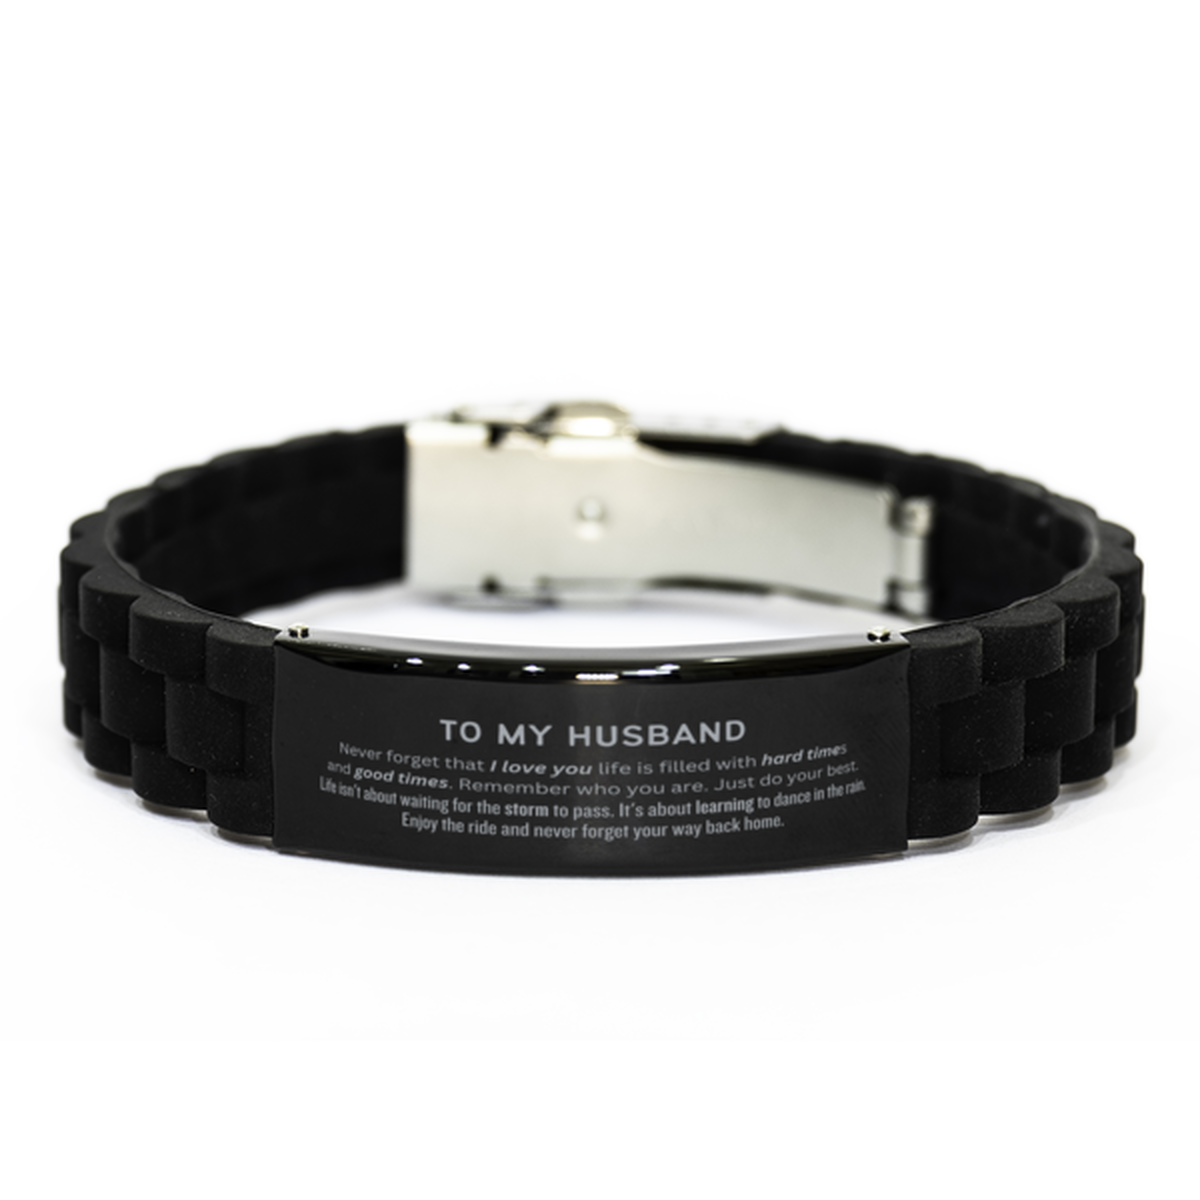 Christmas Husband Black Glidelock Clasp Bracelet Gifts, To My Husband Birthday Thank You Gifts For Husband, Graduation Unique Gifts For Husband To My Husband Never forget that I love you life is filled with hard times and good times. Remember who you are.